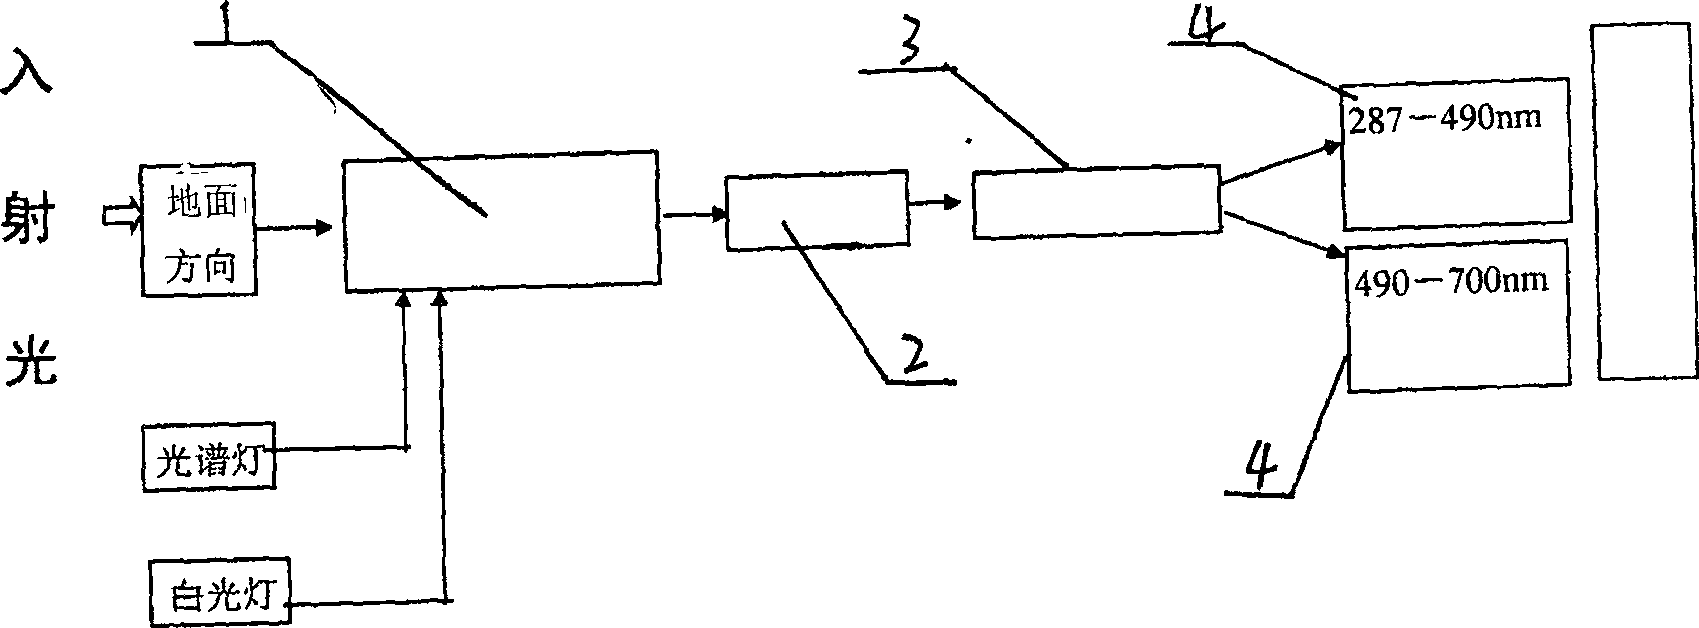 Differential absorption spectrometer import optic block